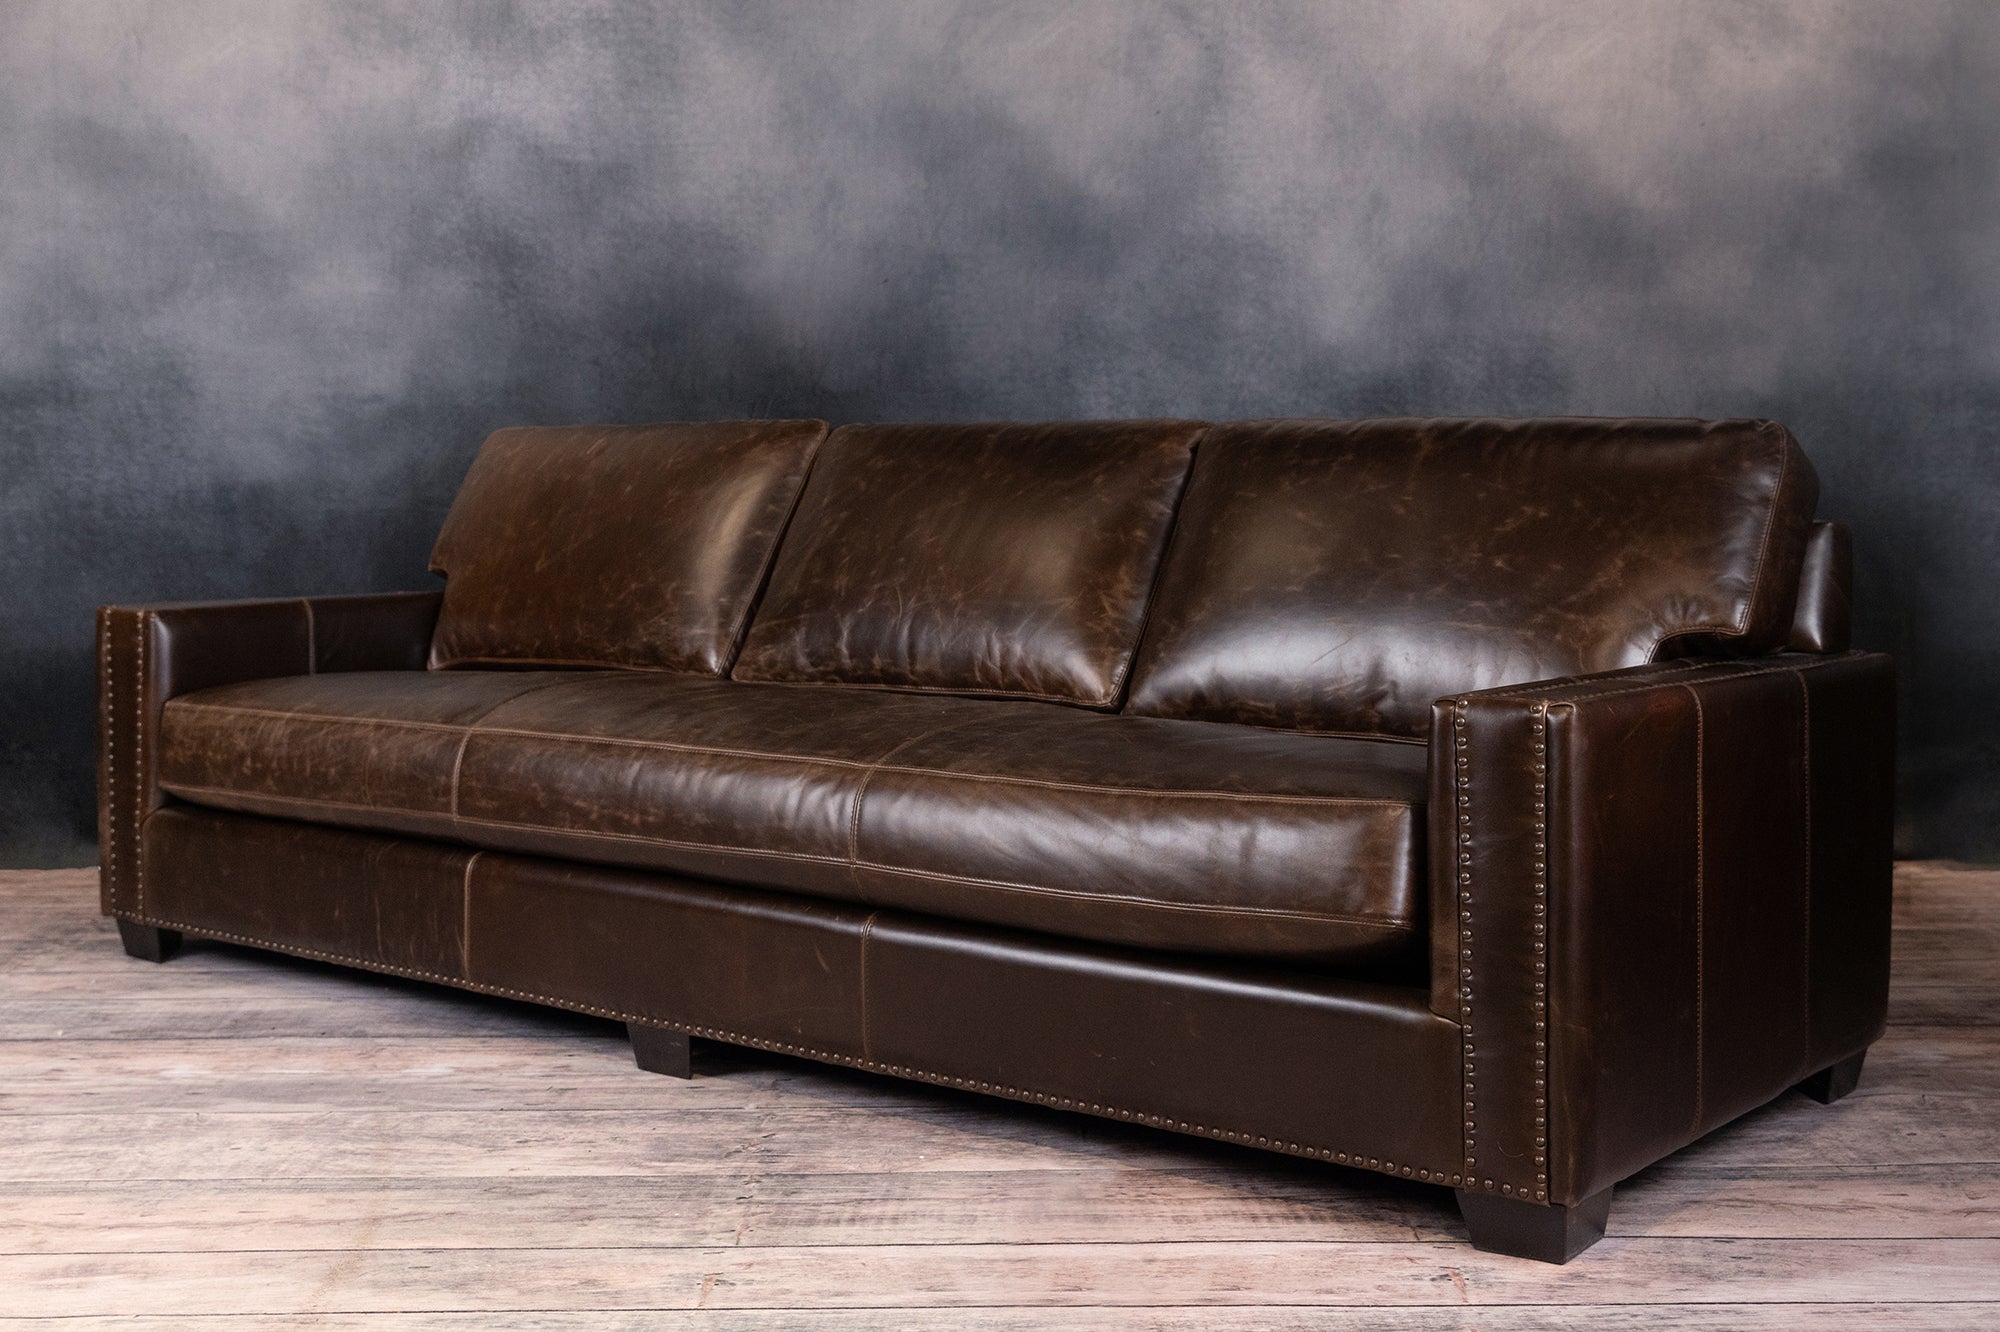 SIR CHARTWELL BENCH SEAT LEATHER SOFA